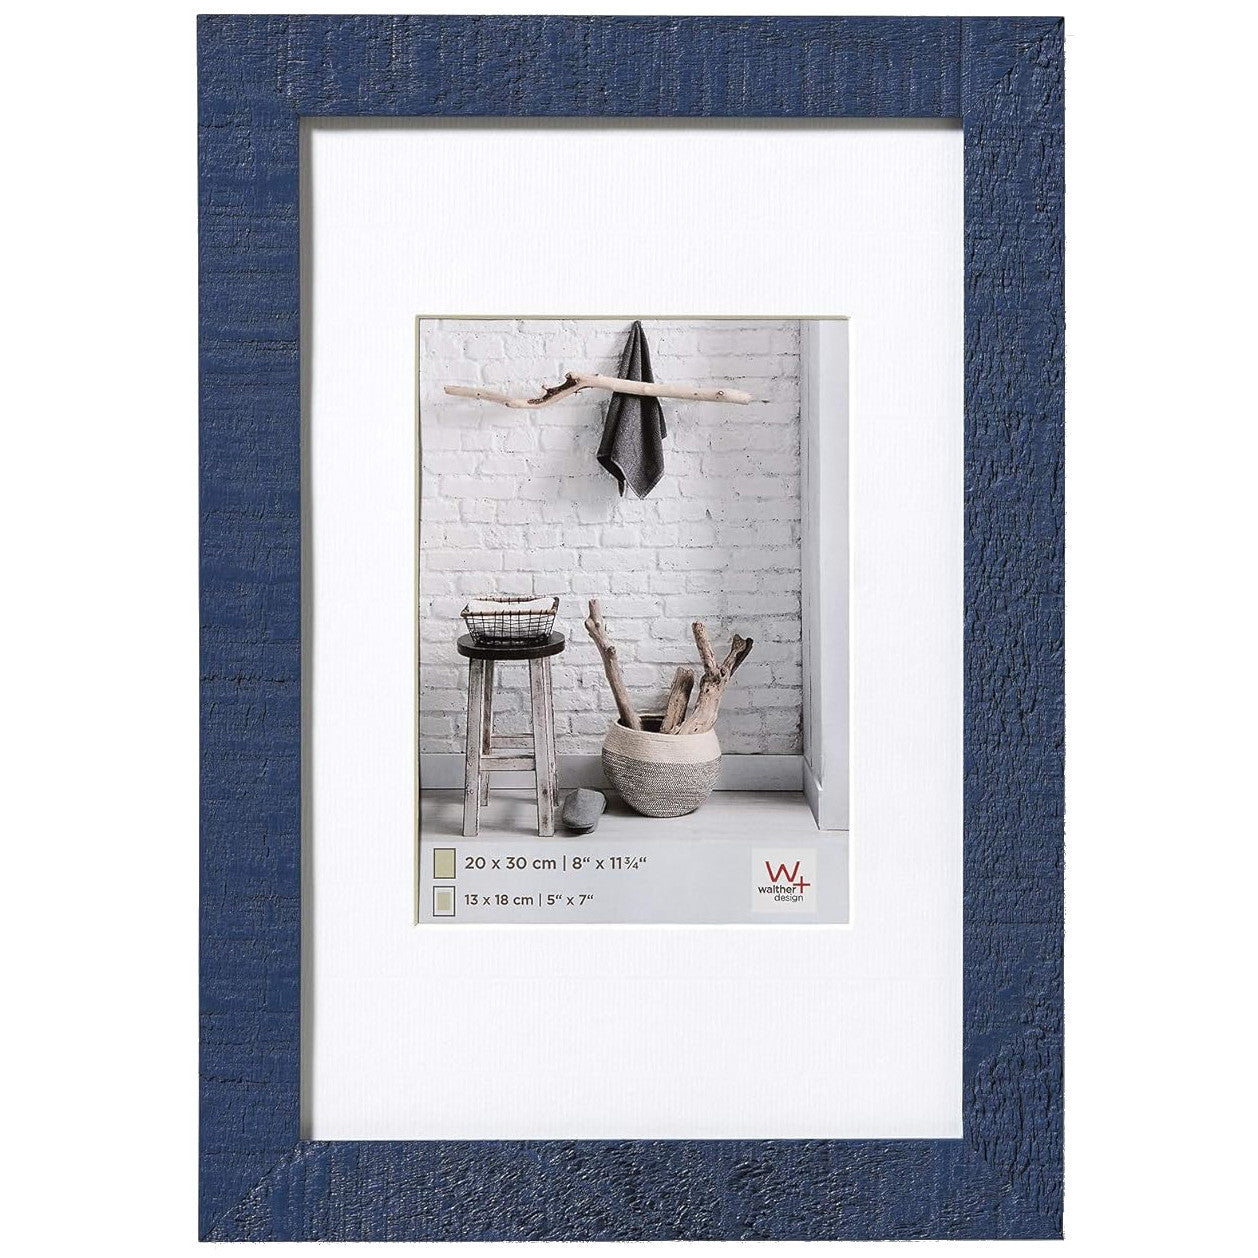 Walther Home Wooden Picture Frame - 17.75x11.75 inch - (Insert 11.75x8 inch) Blue